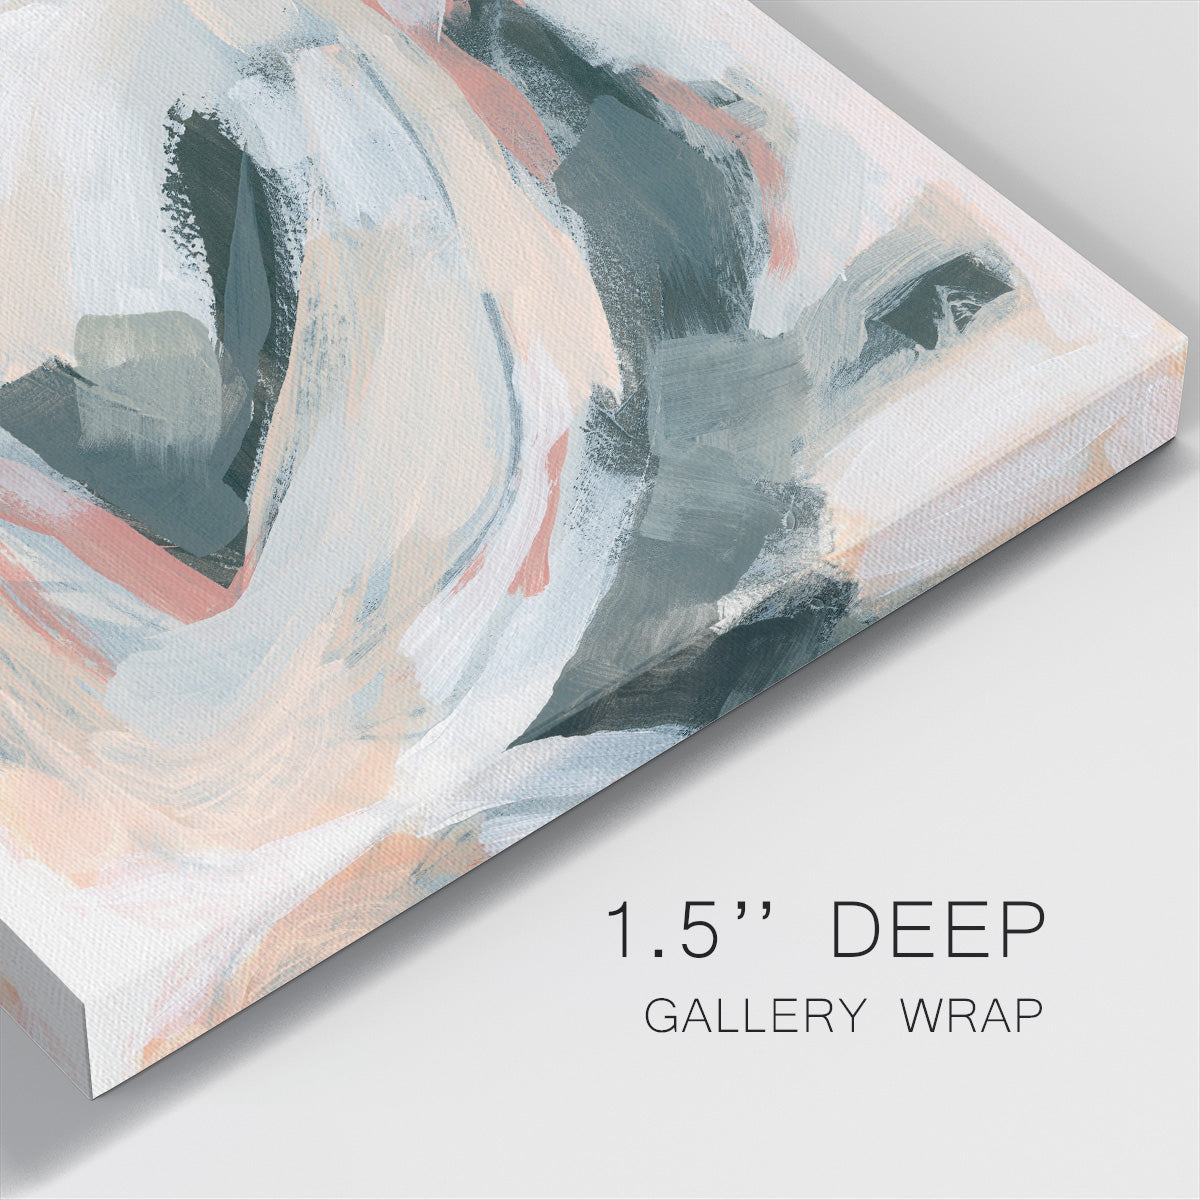 Portal II-Premium Gallery Wrapped Canvas - Ready to Hang